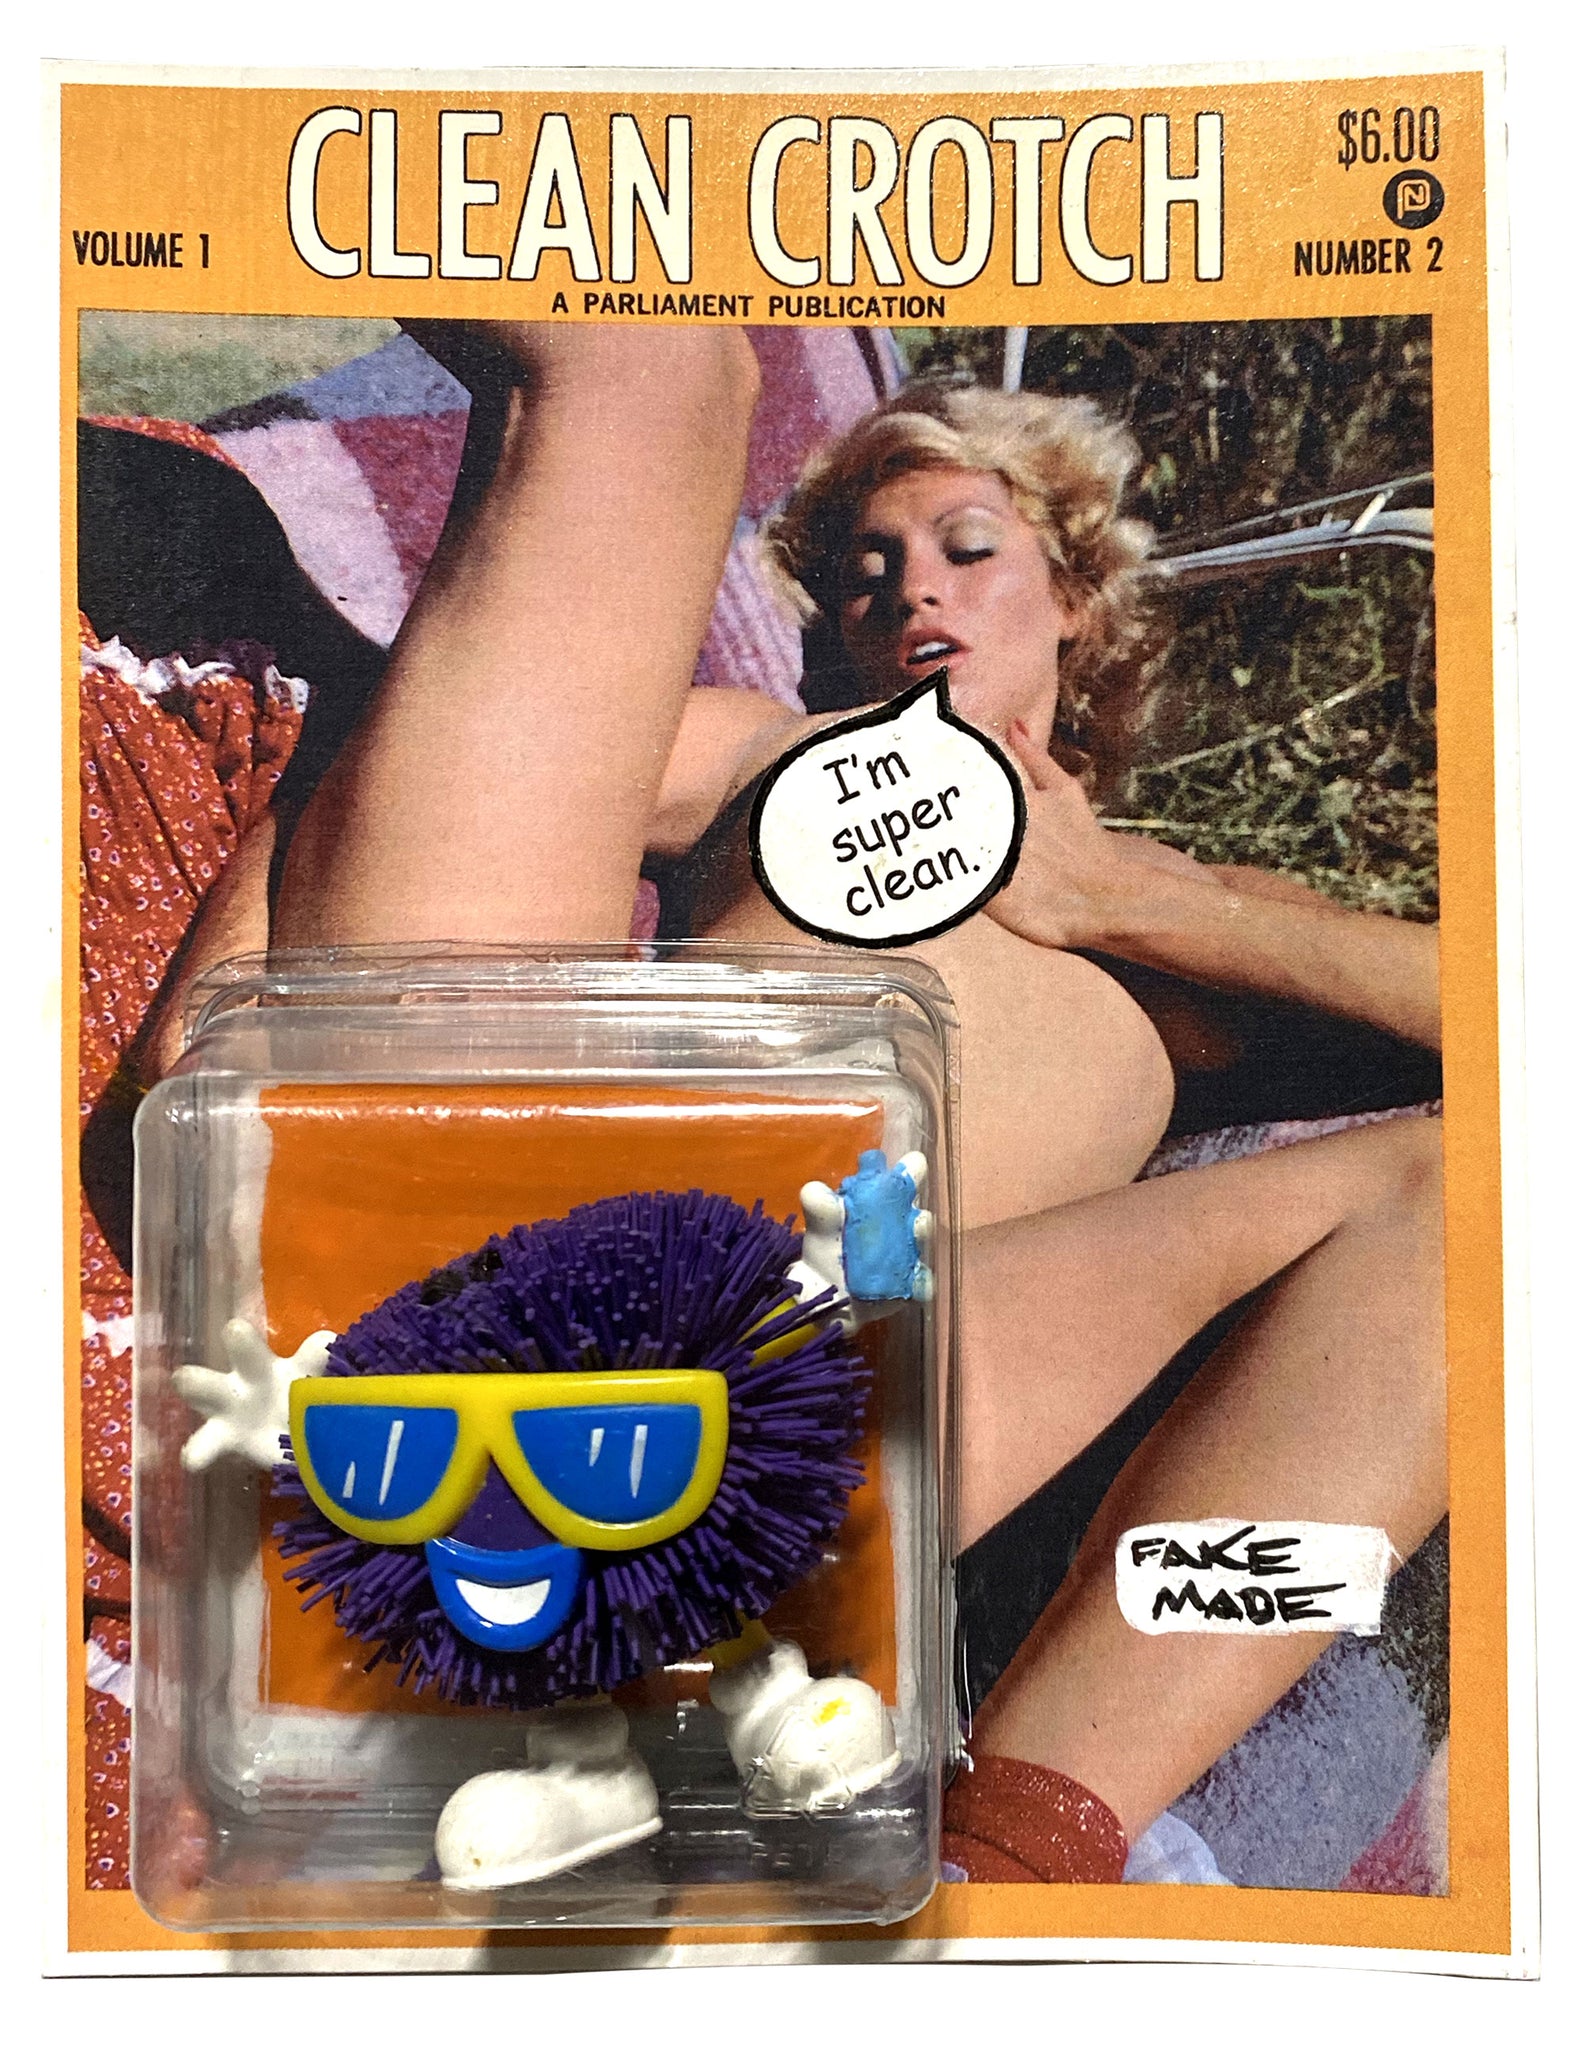 Clean Crotch Super Clean Adulterated Antiporn Custom Carded Appropriated Art Toy by AEQEA